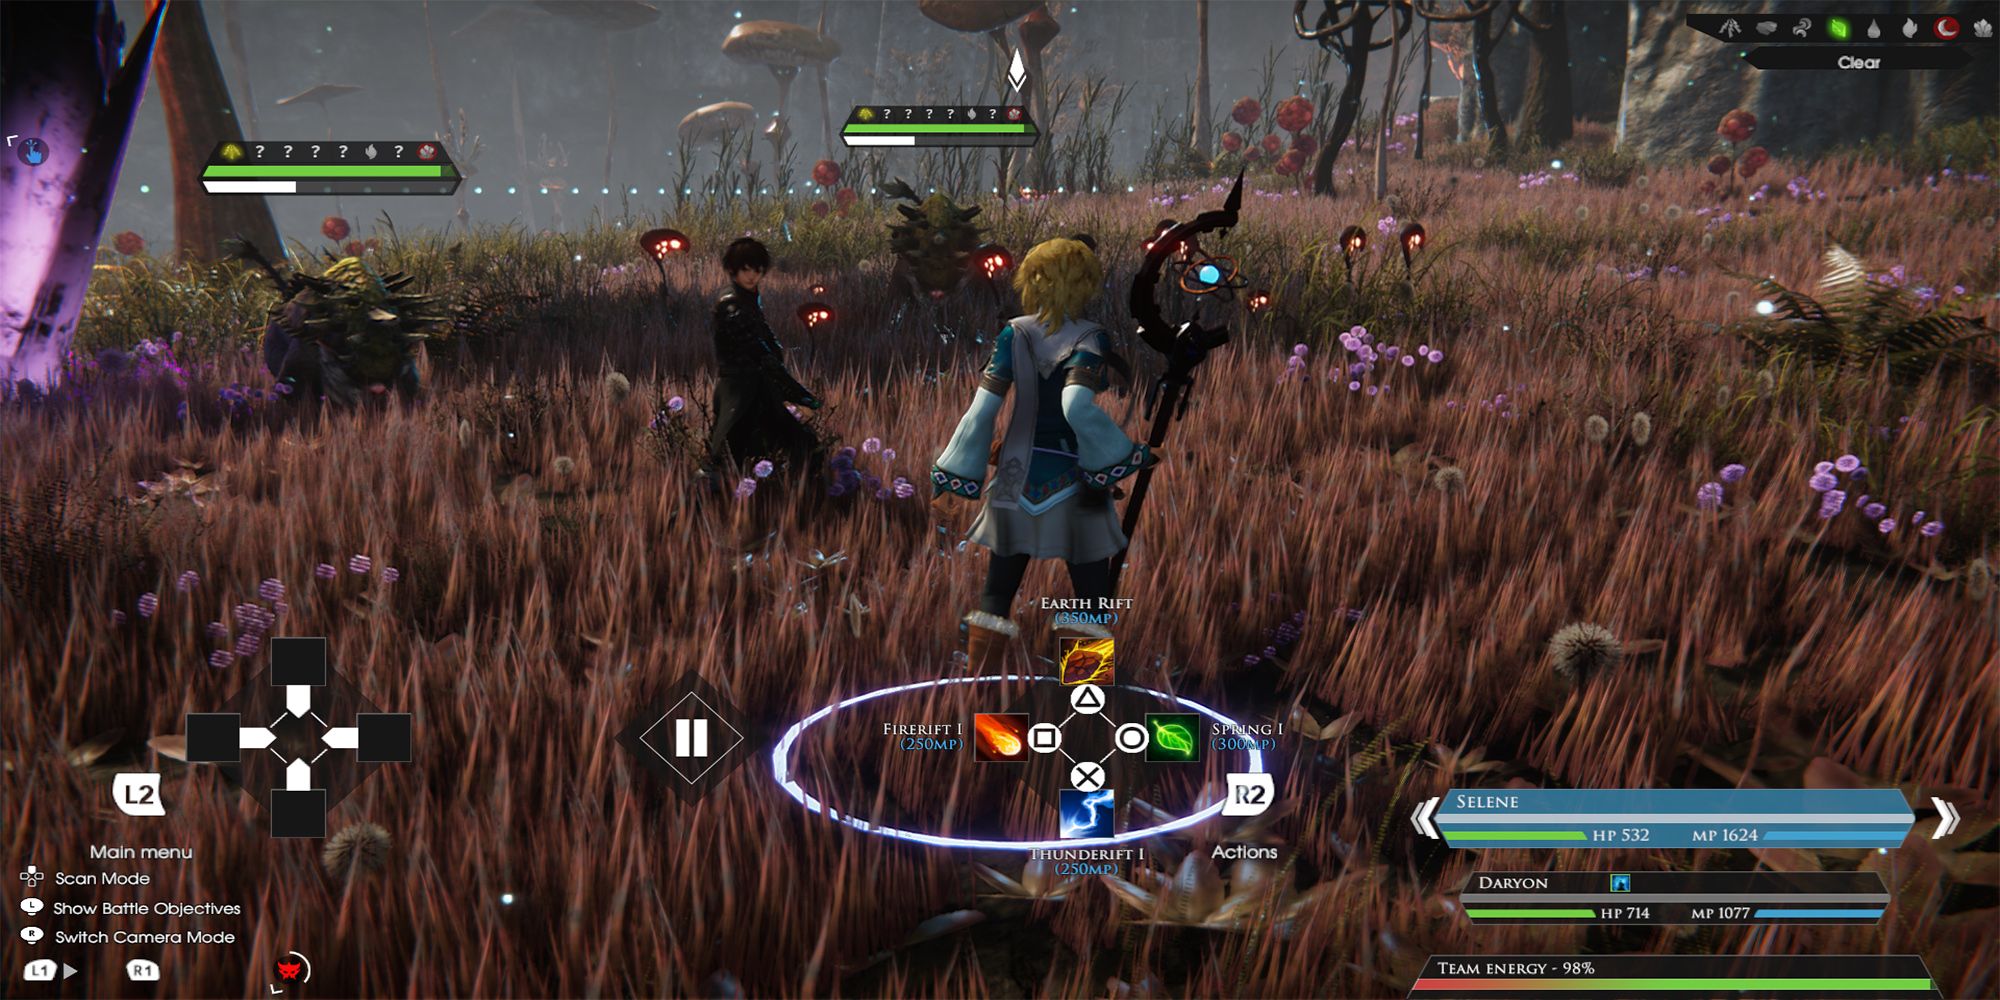 Selene chooses from her spell menu while facing off with Daryon against two orokkos in the Marsh of Alasea in Edge of Eternity.